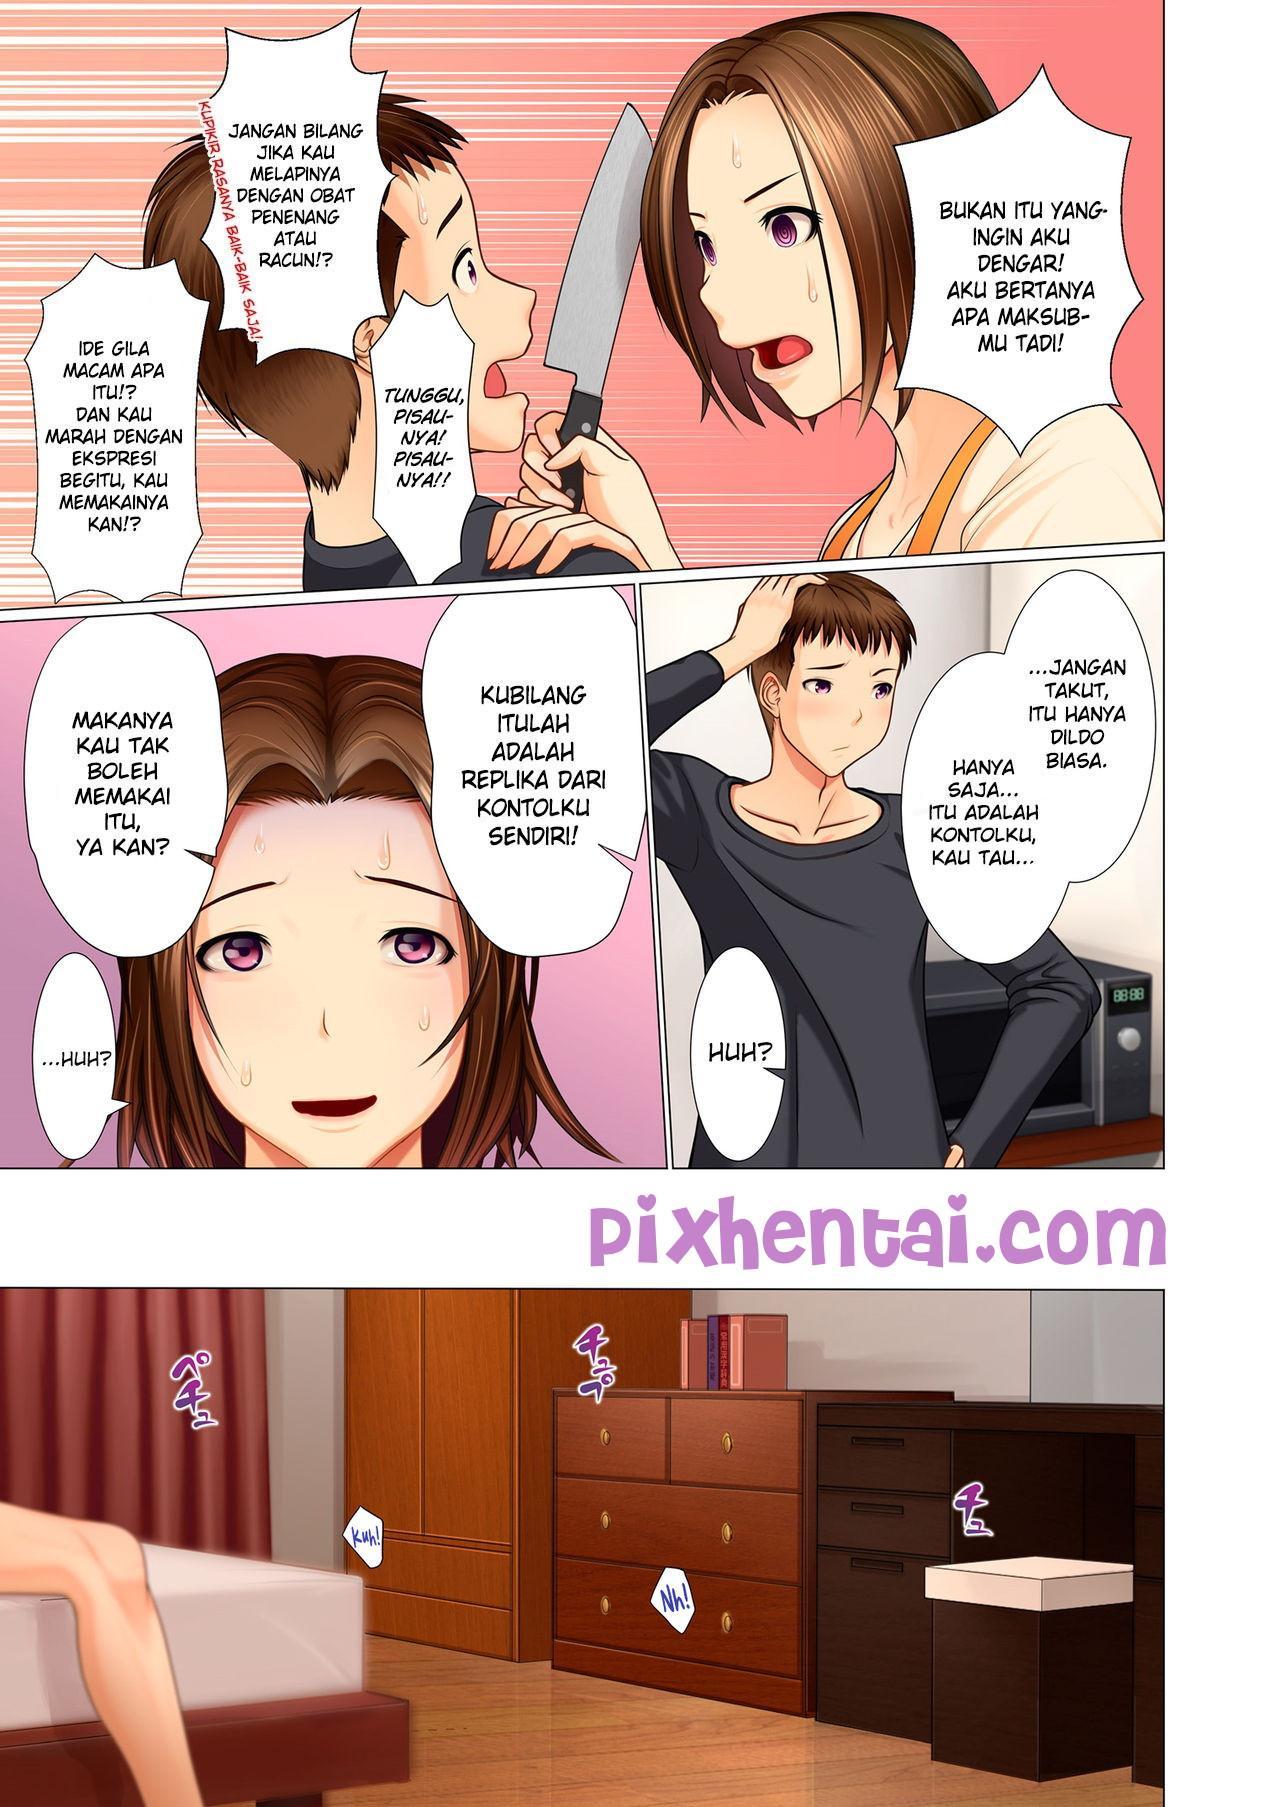 Komik Hentai Mother and Son Connected By An Immoral Rod Of Lust Manga XXX Porn Doujin Sex Bokep 11